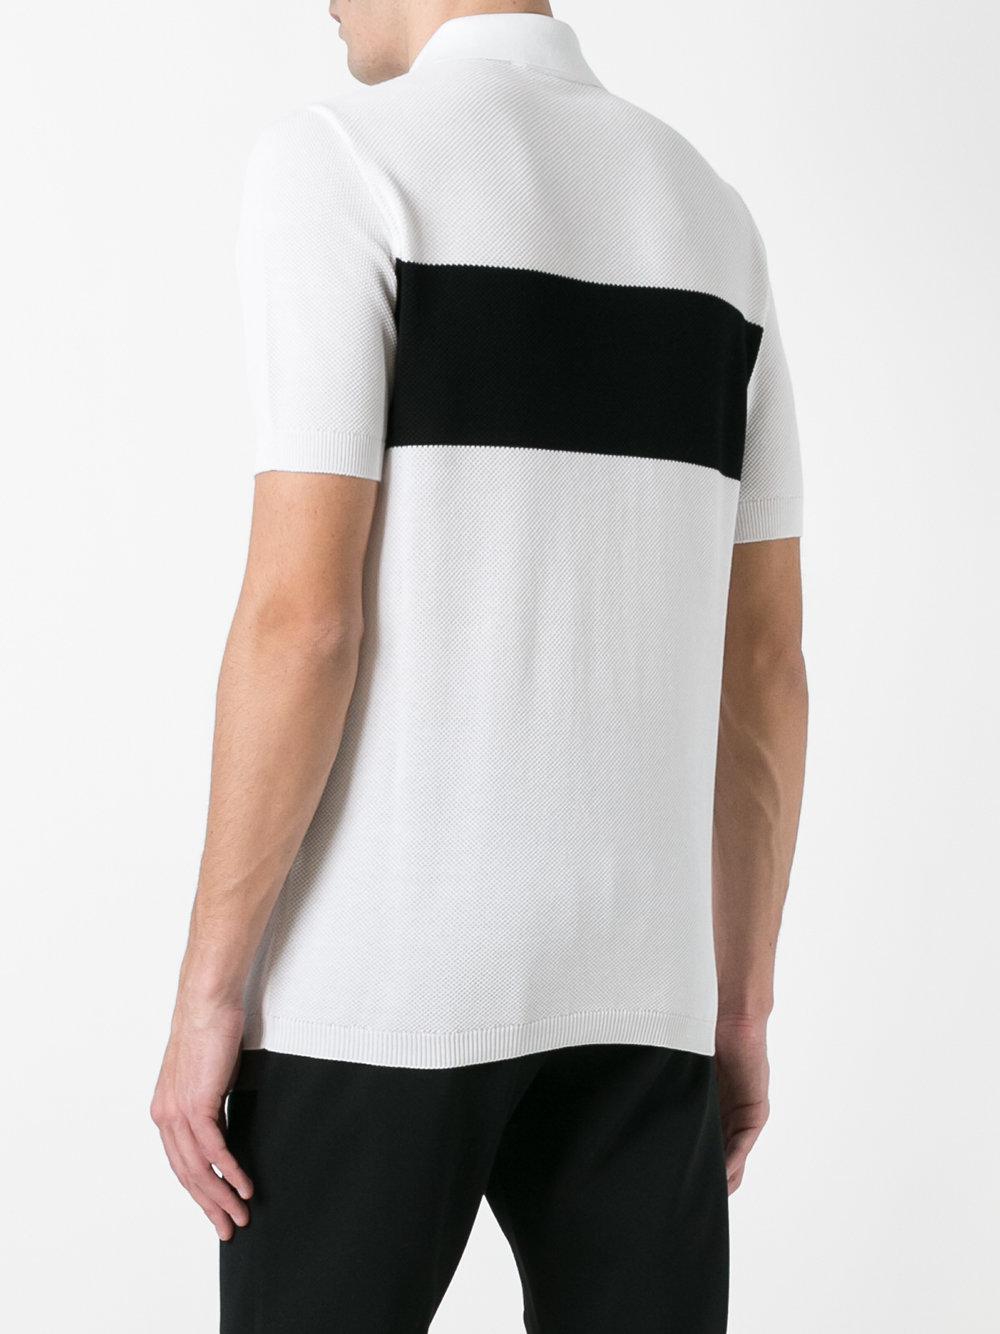 Lyst - Fendi Abstract Face Polo Shirt in White for Men